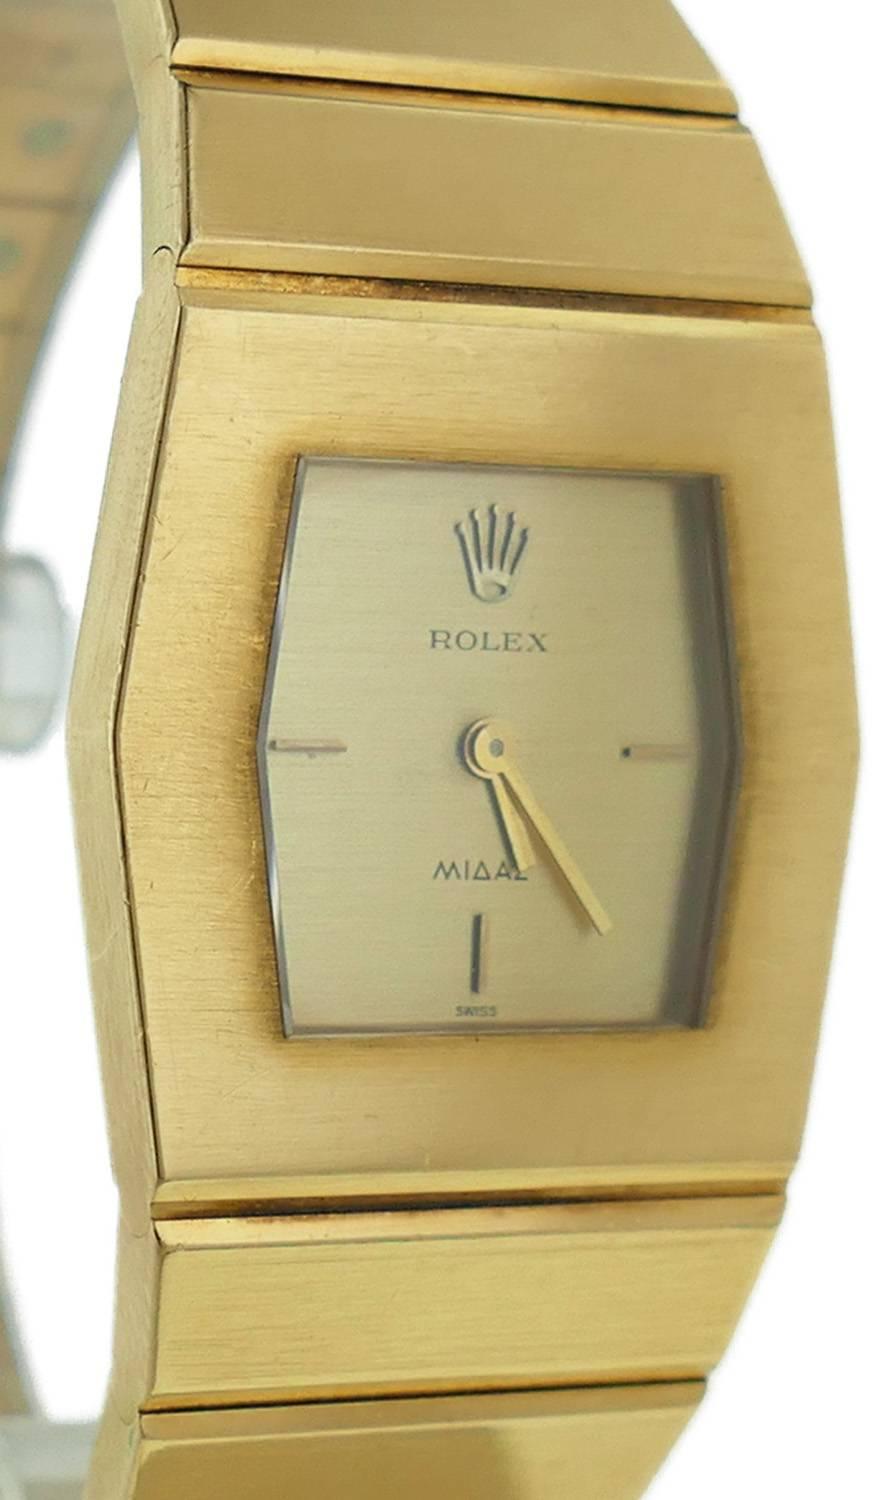 Ladies Rolex Queen Midas 18k Yellow Gold Watch. The Watch is in Excellent Condition, It Appears to Have Never Been Polished. The Watch Is Keeping Perfect Time; Movement is Operated by Manual Mechanical Winding. The Watch Bracelet Fits up to a Appx